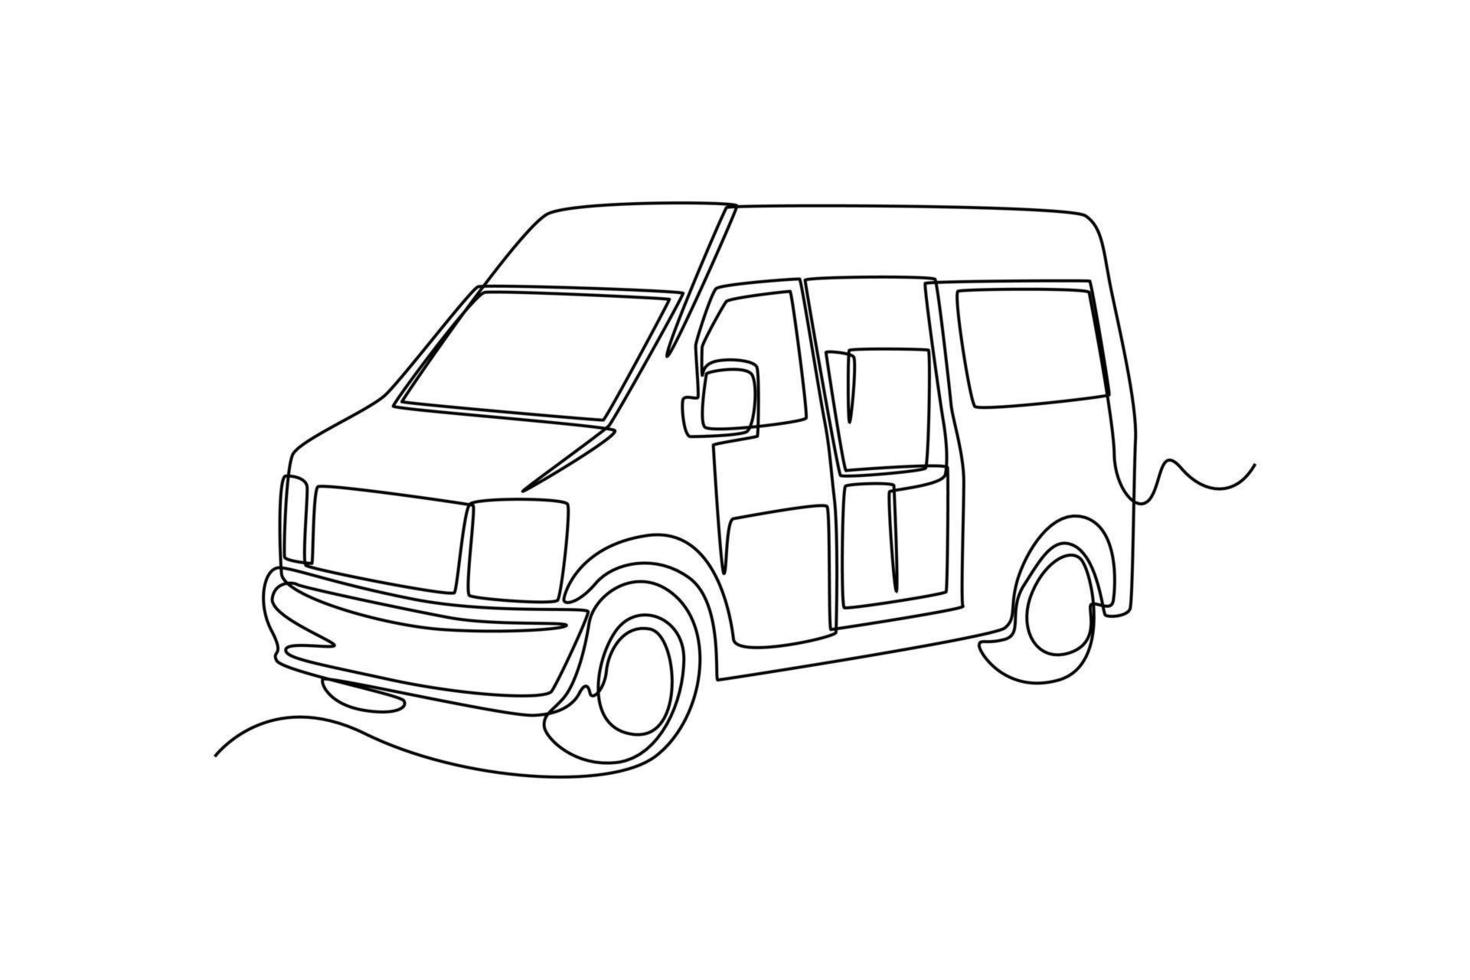 Continuous one line drawing Delivery van going to port with cargo boxes. Cargo Concept. Single line draw design vector graphic illustration.